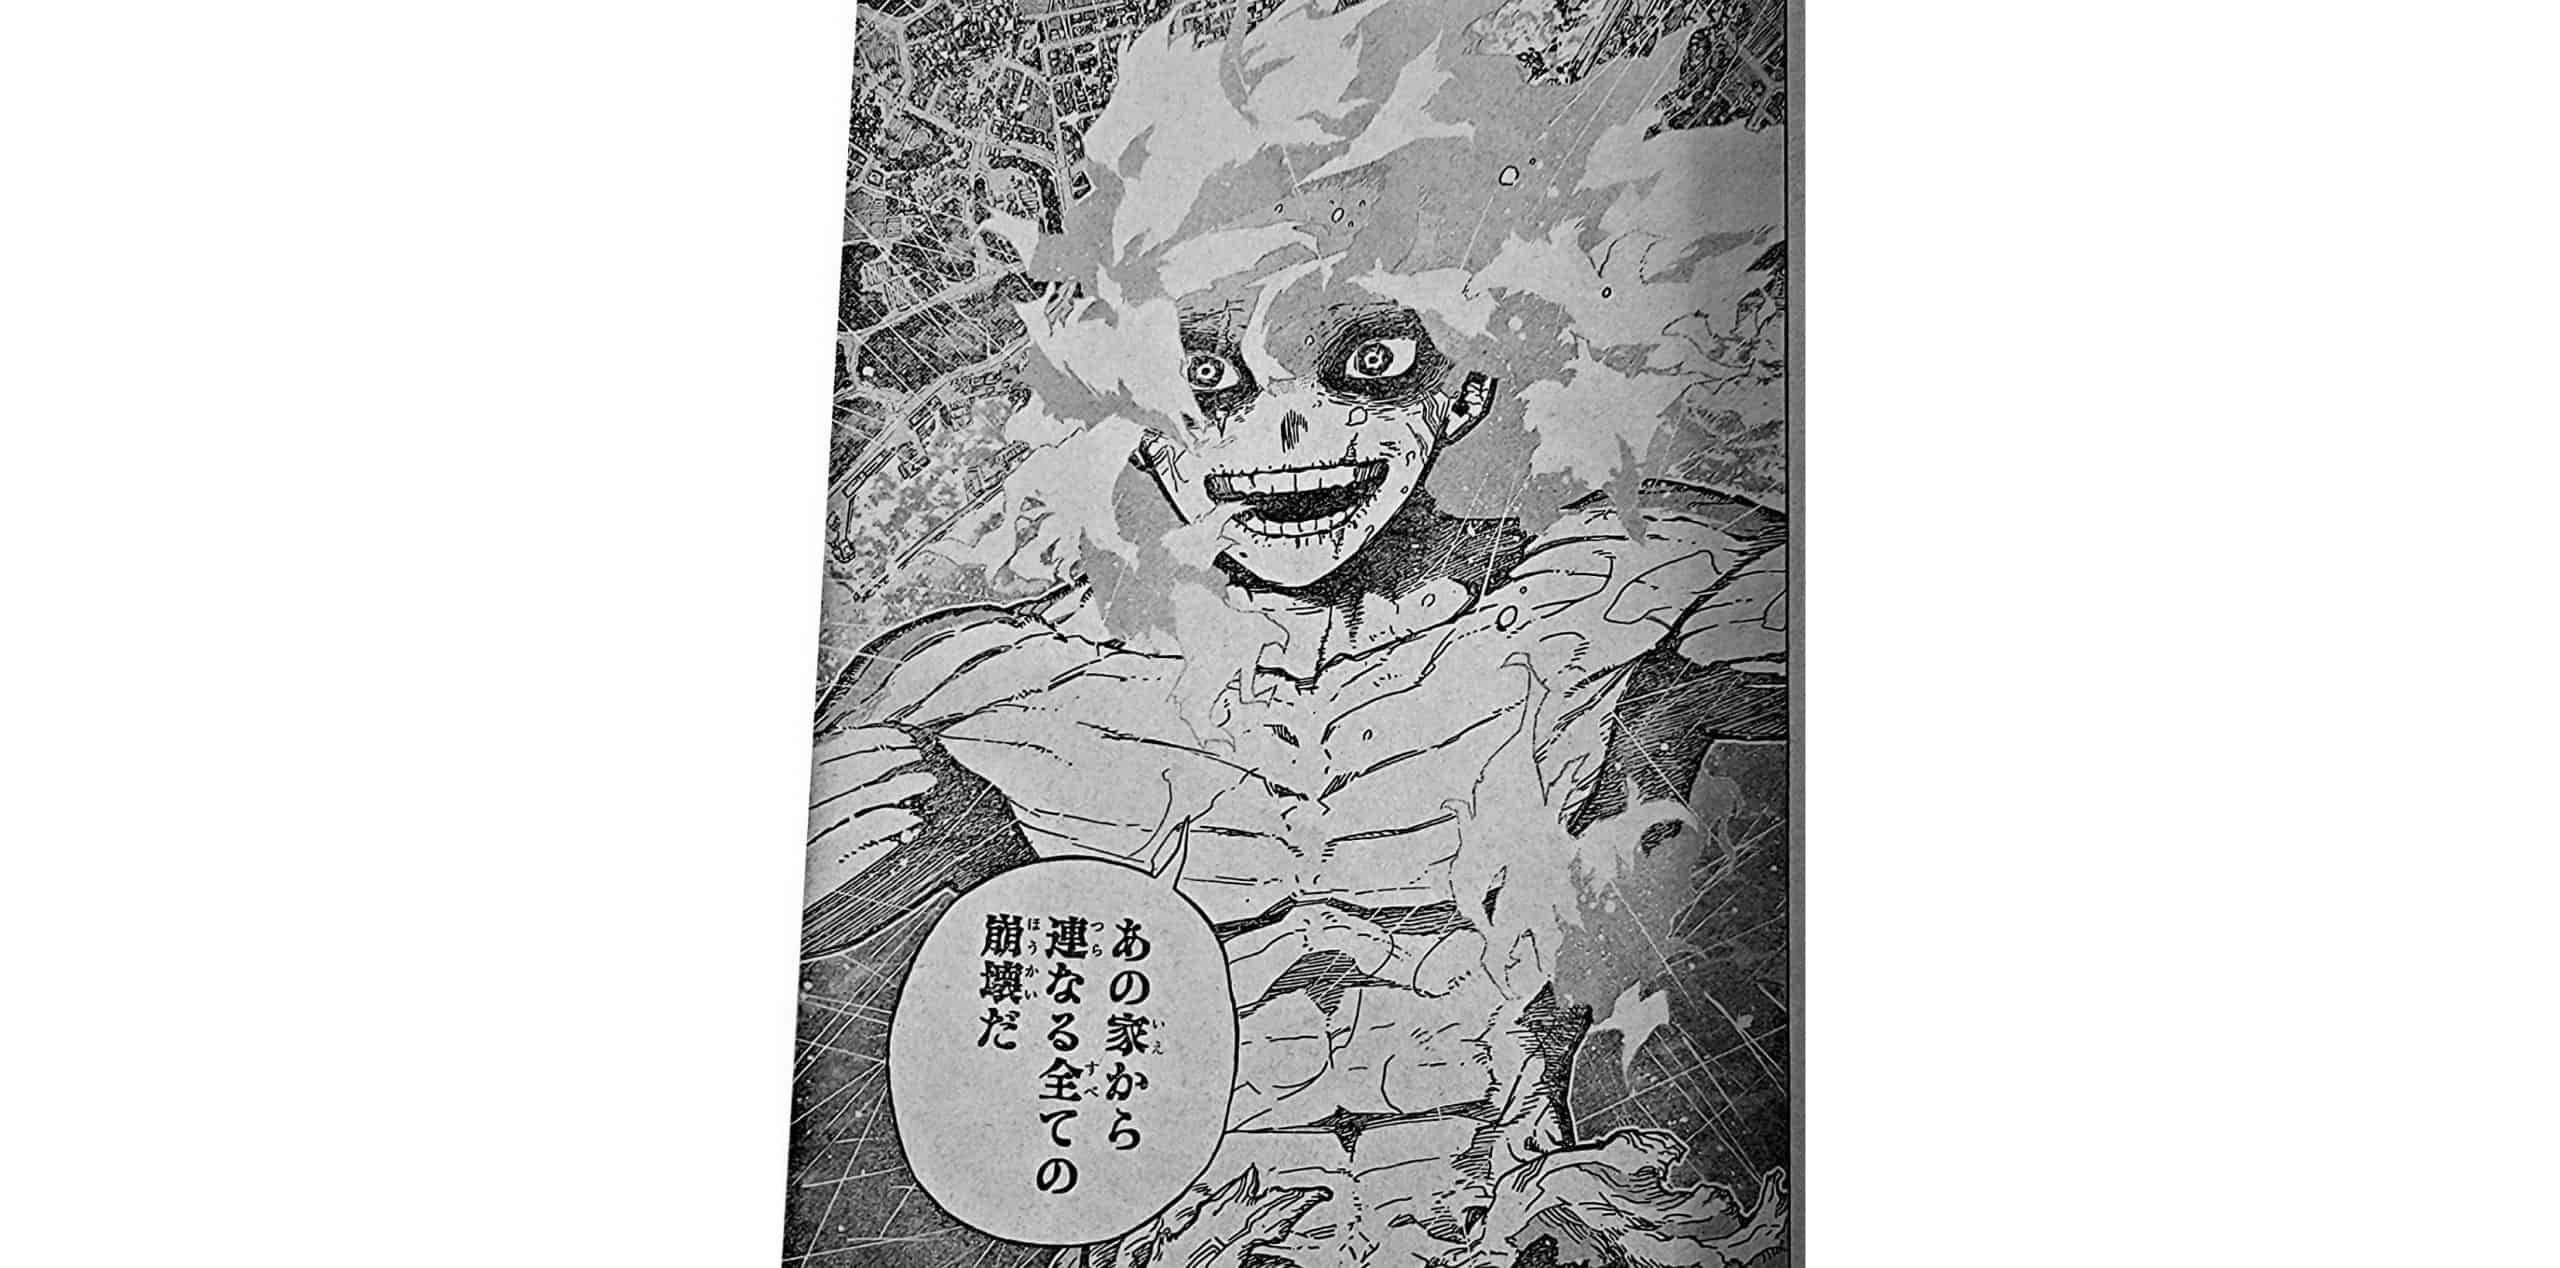 My Hero Academia Chapter 379 Spoilers & Raw Scans